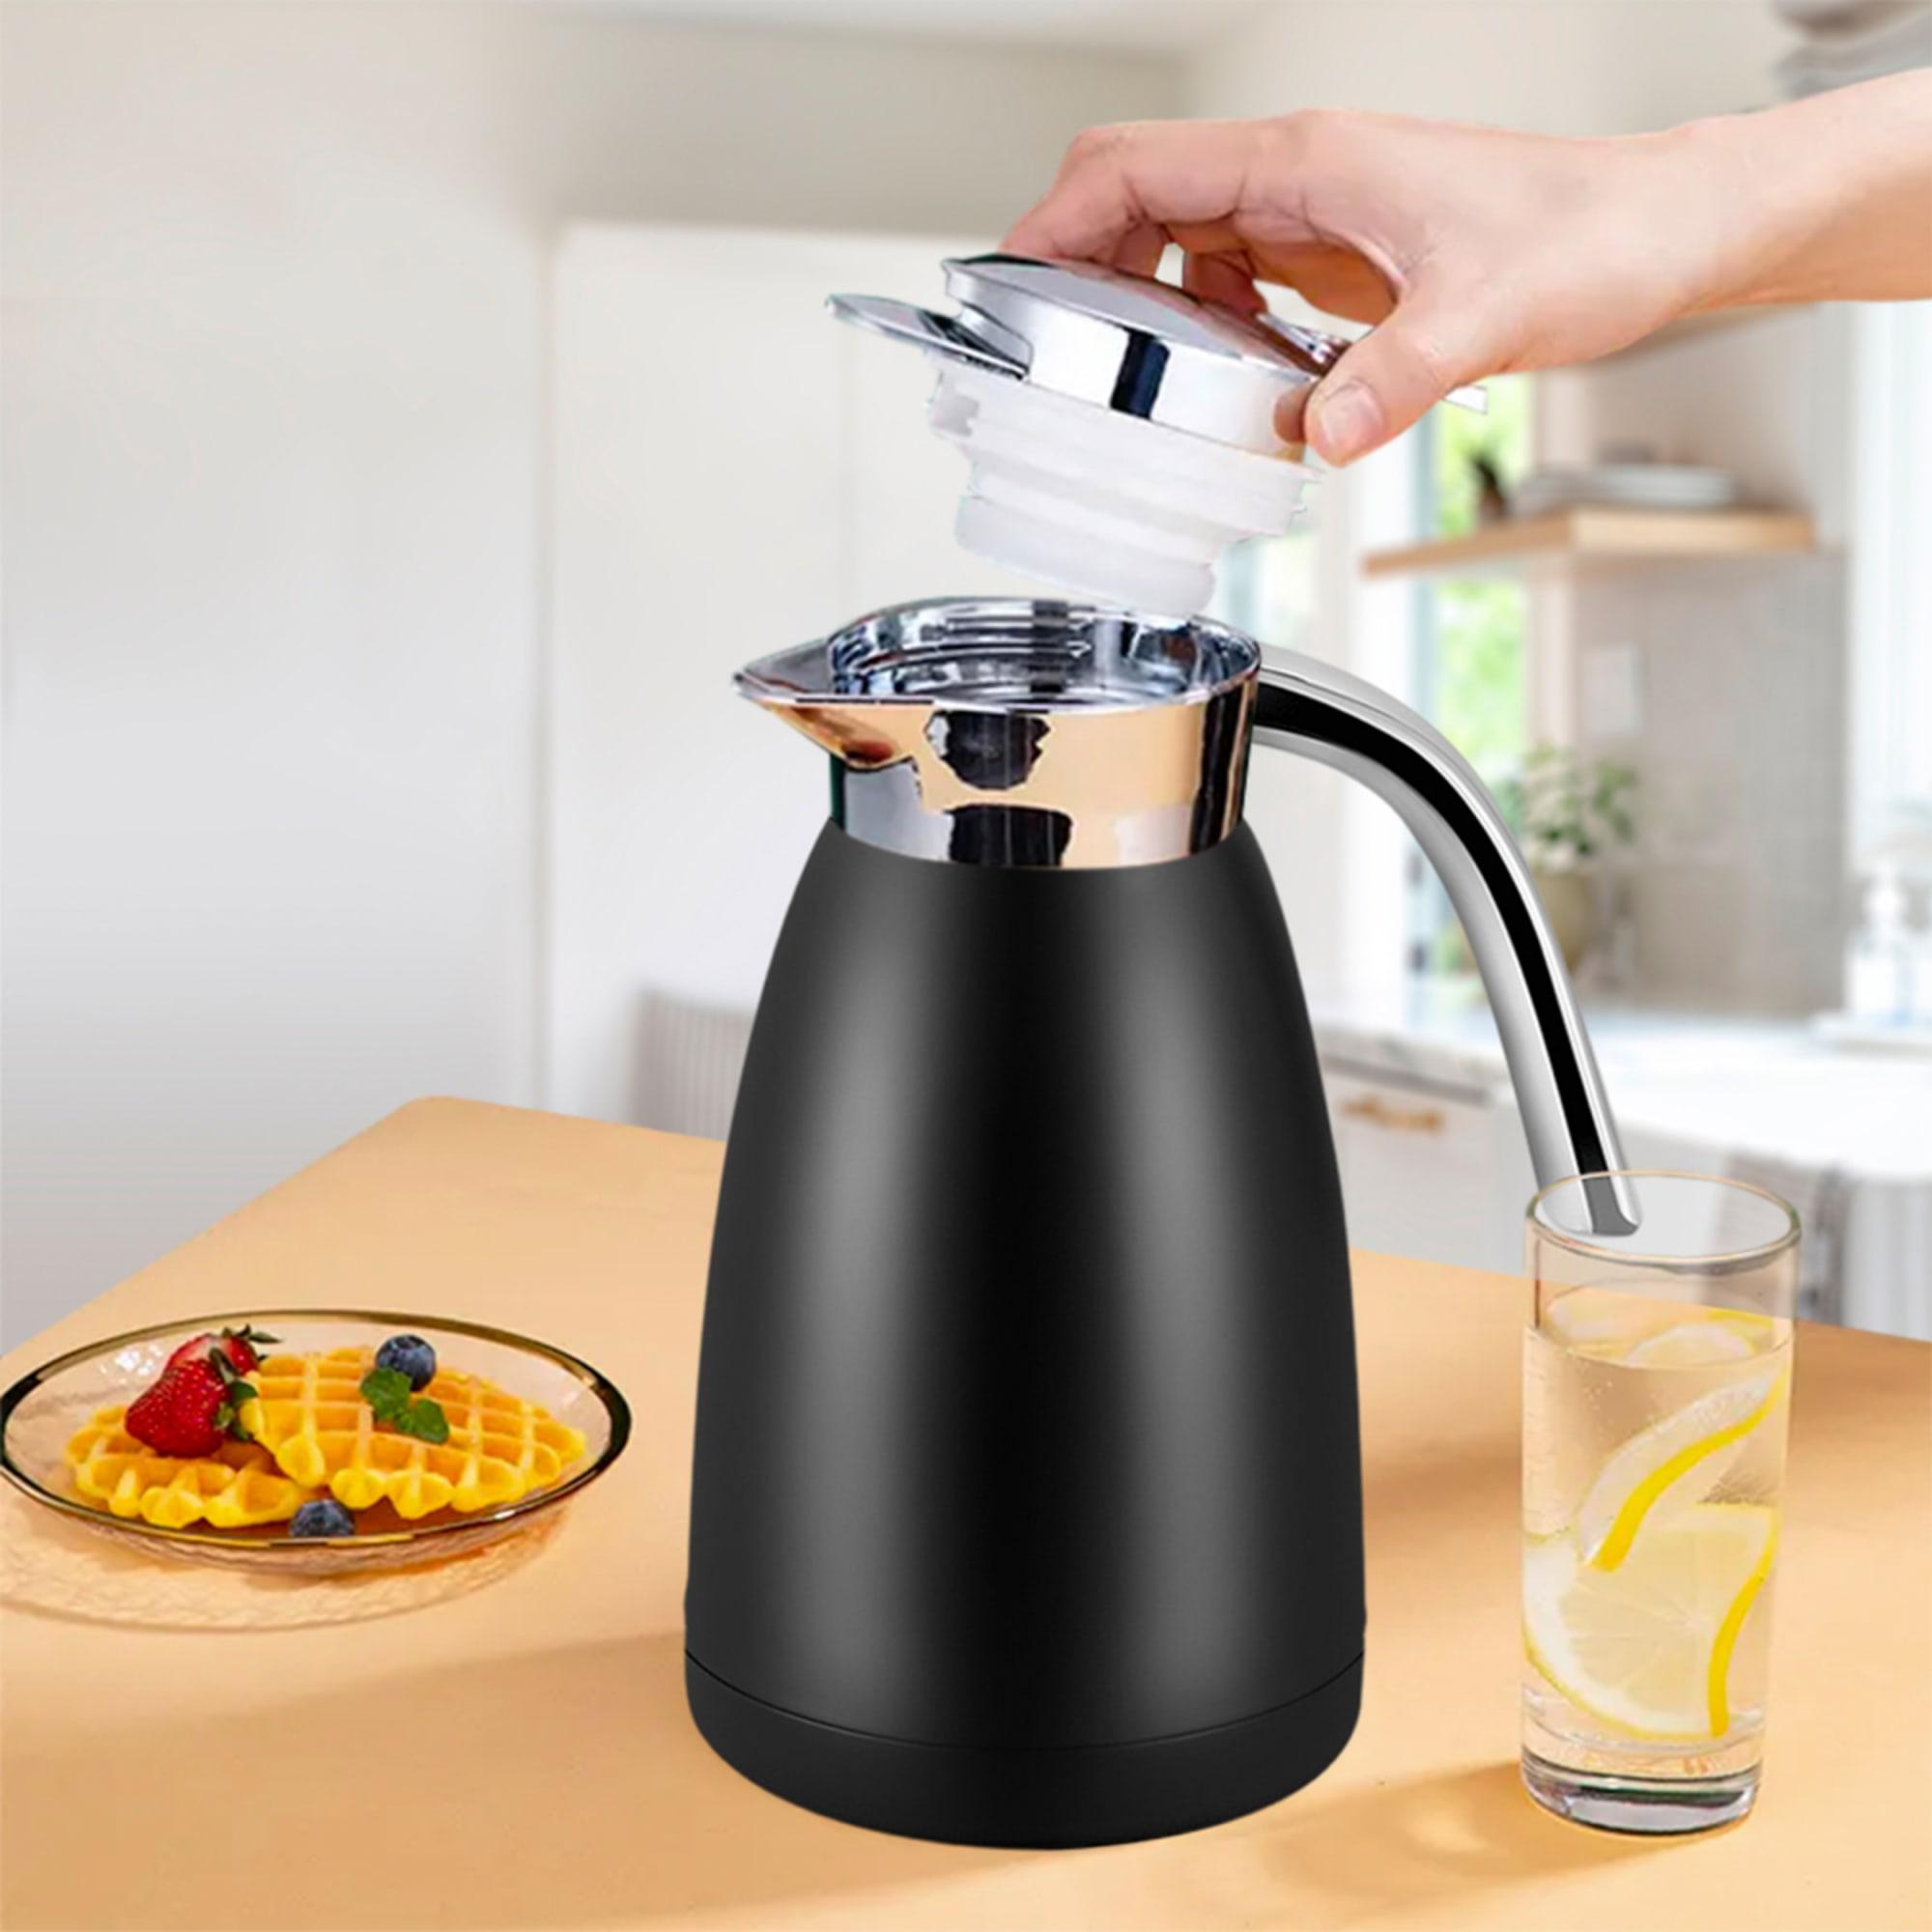 Soga Stainless Steel Insulated Kettle 2.2L Black Image 4